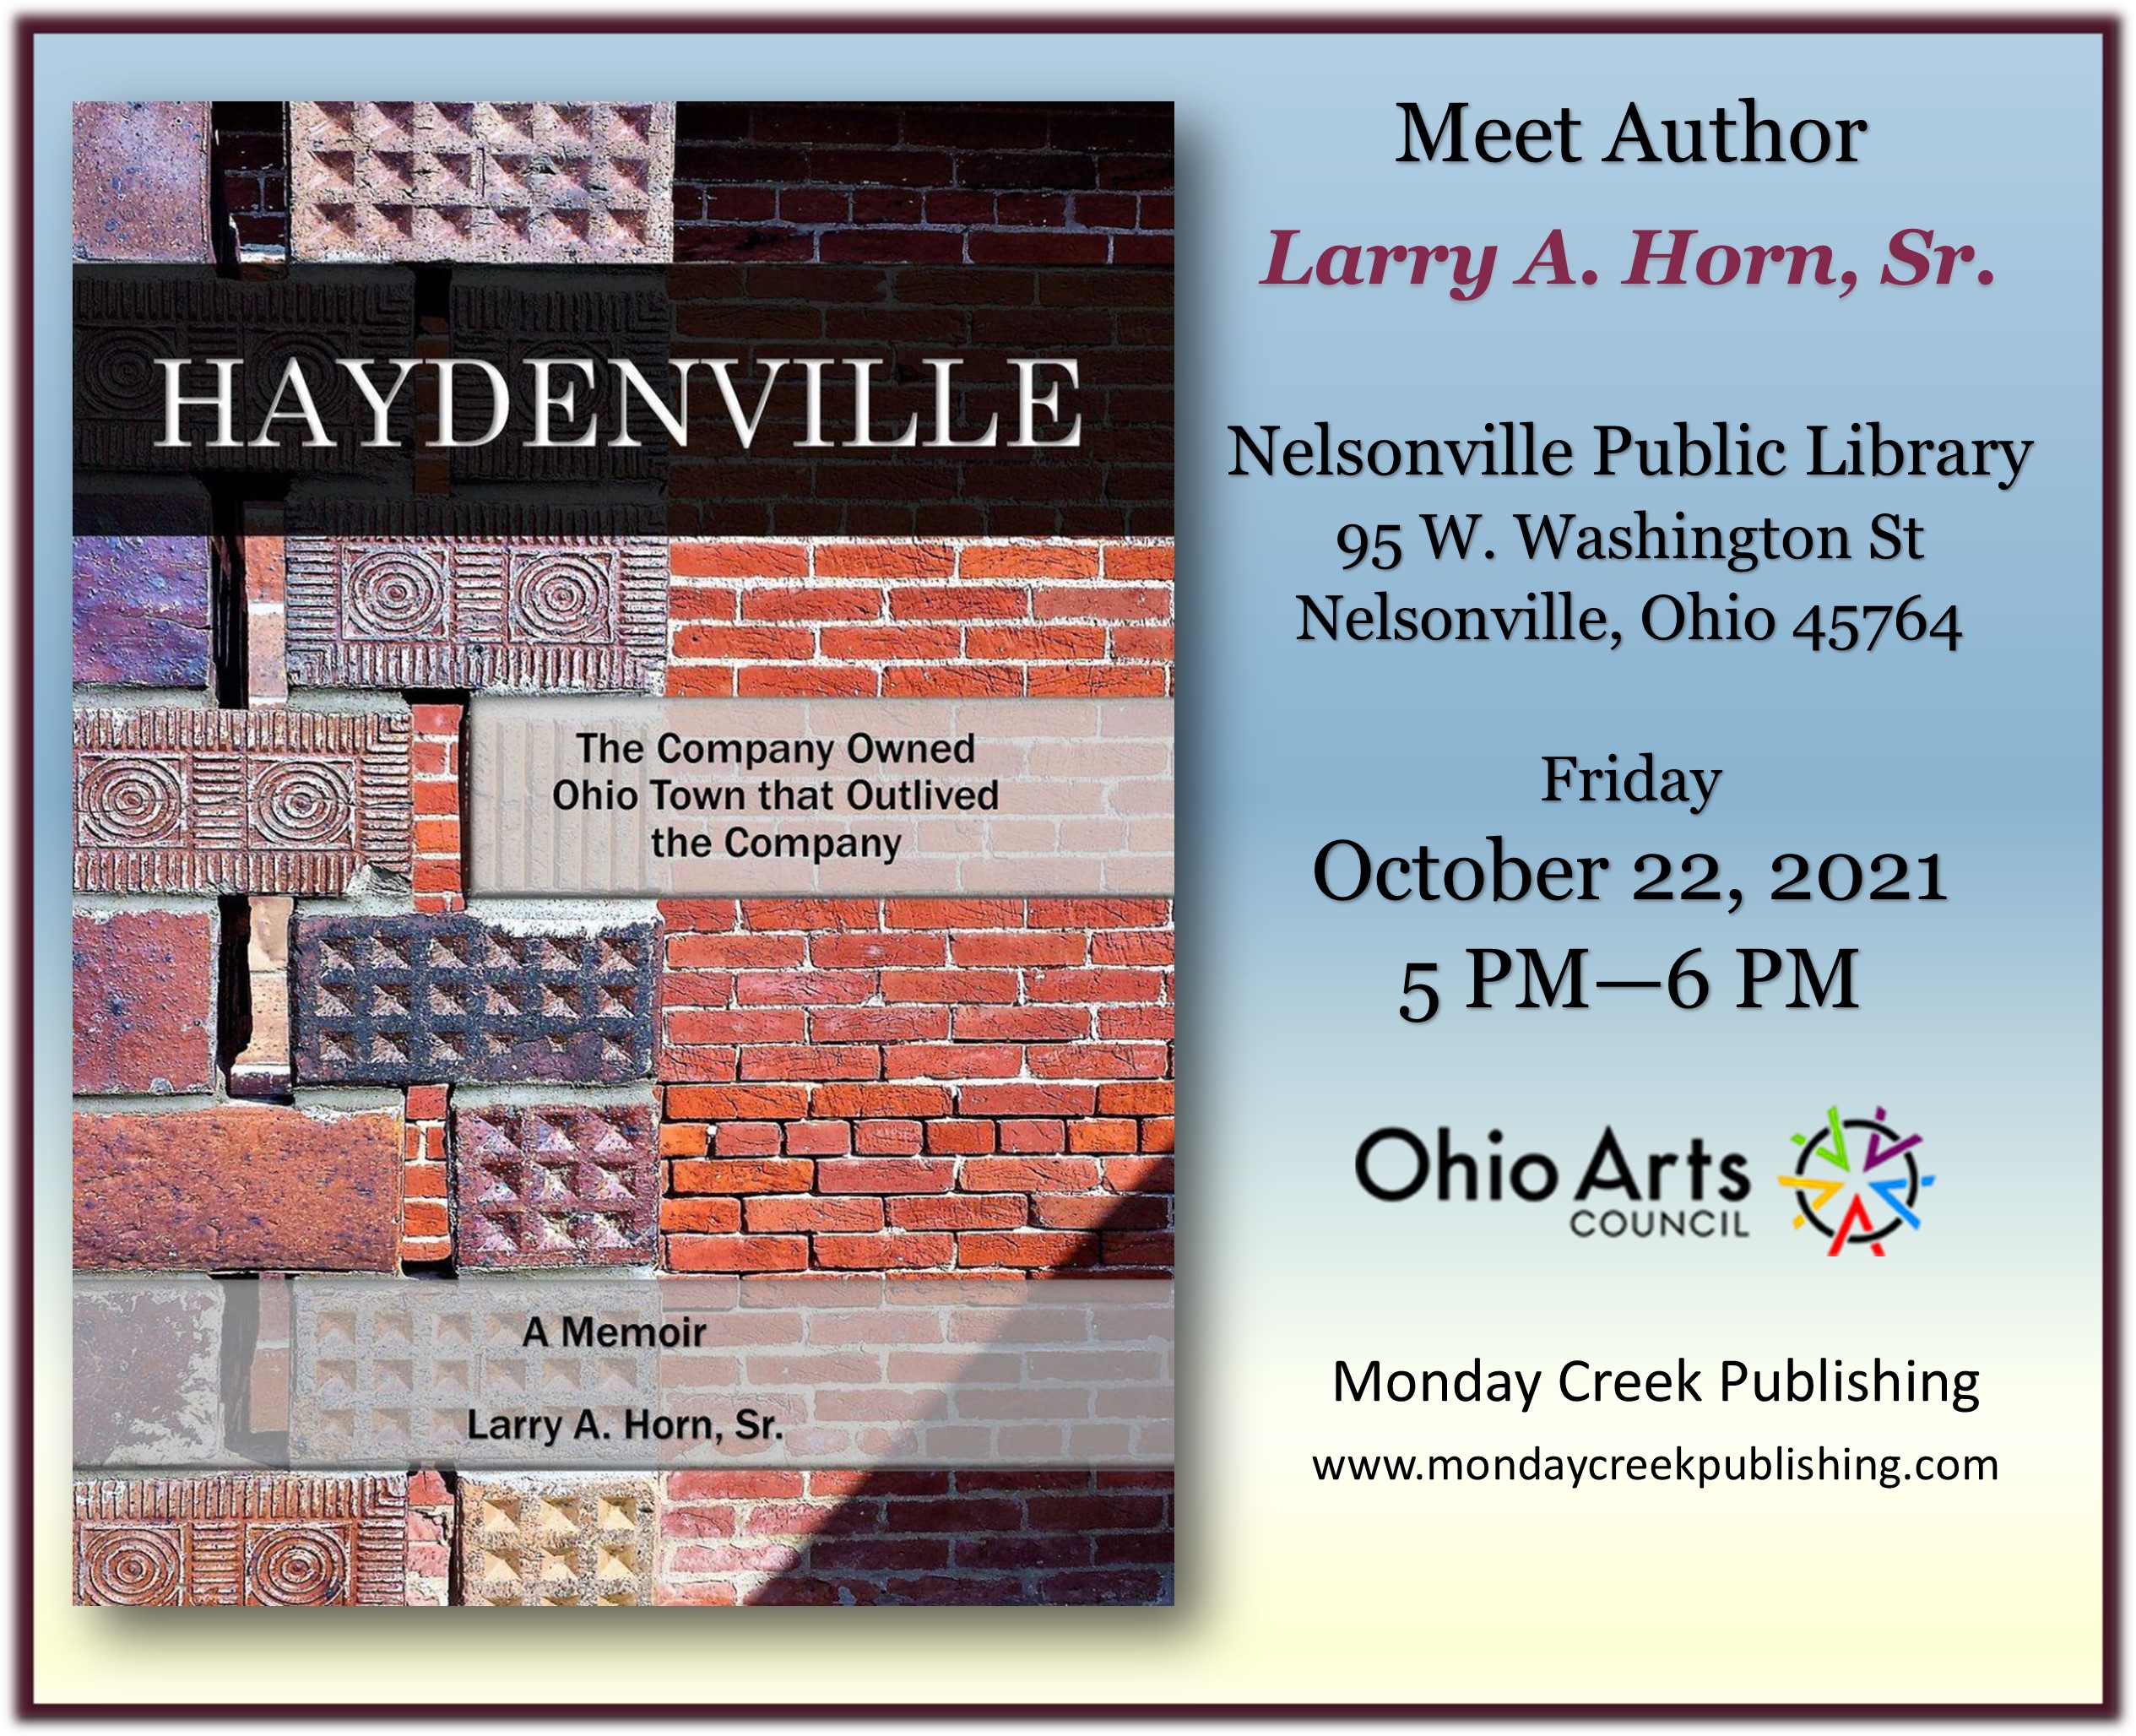 Haydenville: The Company Town that Outlived the Company